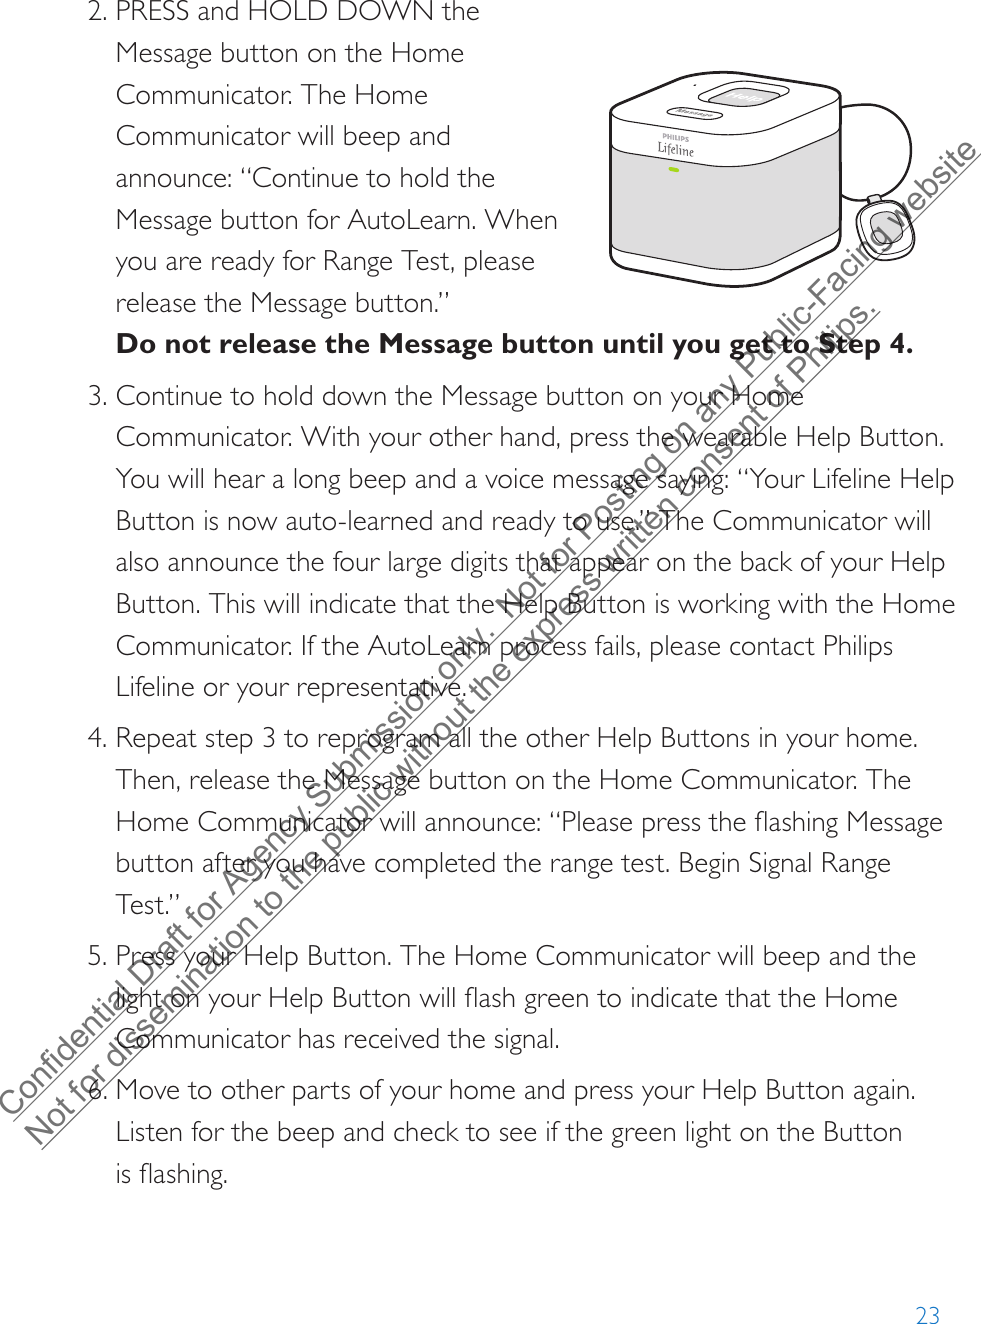 232. PRESS and HOLD DOWN theMessage button on the HomeCommunicator. The HomeCommunicator will beep andannounce: “Continue to hold theMessage button for AutoLearn. Whenyou are ready for Range Test, pleaserelease the Message button.”Do not release the Message button until you get to Step 4.3. Continue to hold down the Message button on your Home Communicator. With your other hand, press the wearable Help Button. You will hear a long beep and a voice message saying: “Your Lifeline Help Button is now auto-learned and ready to use.” The Communicator will also announce the four large digits that appear on the back of your Help Button. This will indicate that the Help Button is working with the Home Communicator. If the AutoLearn process fails, please contact Philips Lifeline or your representative.4. Repeat step 3 to reprogram all the other Help Buttons in your home.Then, release the Message button on the Home Communicator. TheHome Communicator will announce: “Please press the flashing Messagebutton after you have completed the range test. Begin Signal RangeTest.”5. Press your Help Button. The Home Communicator will beep and thelight on your Help Button will flash green to indicate that the HomeCommunicator has received the signal.6. Move to other parts of your home and press your Help Button again.Listen for the beep and check to see if the green light on the Buttonis flashing.Confidential Draft for Agency Submission only.  Not for Posting on any Public-Facing website Not for dissemination to the public without the express written consent of Philips.  